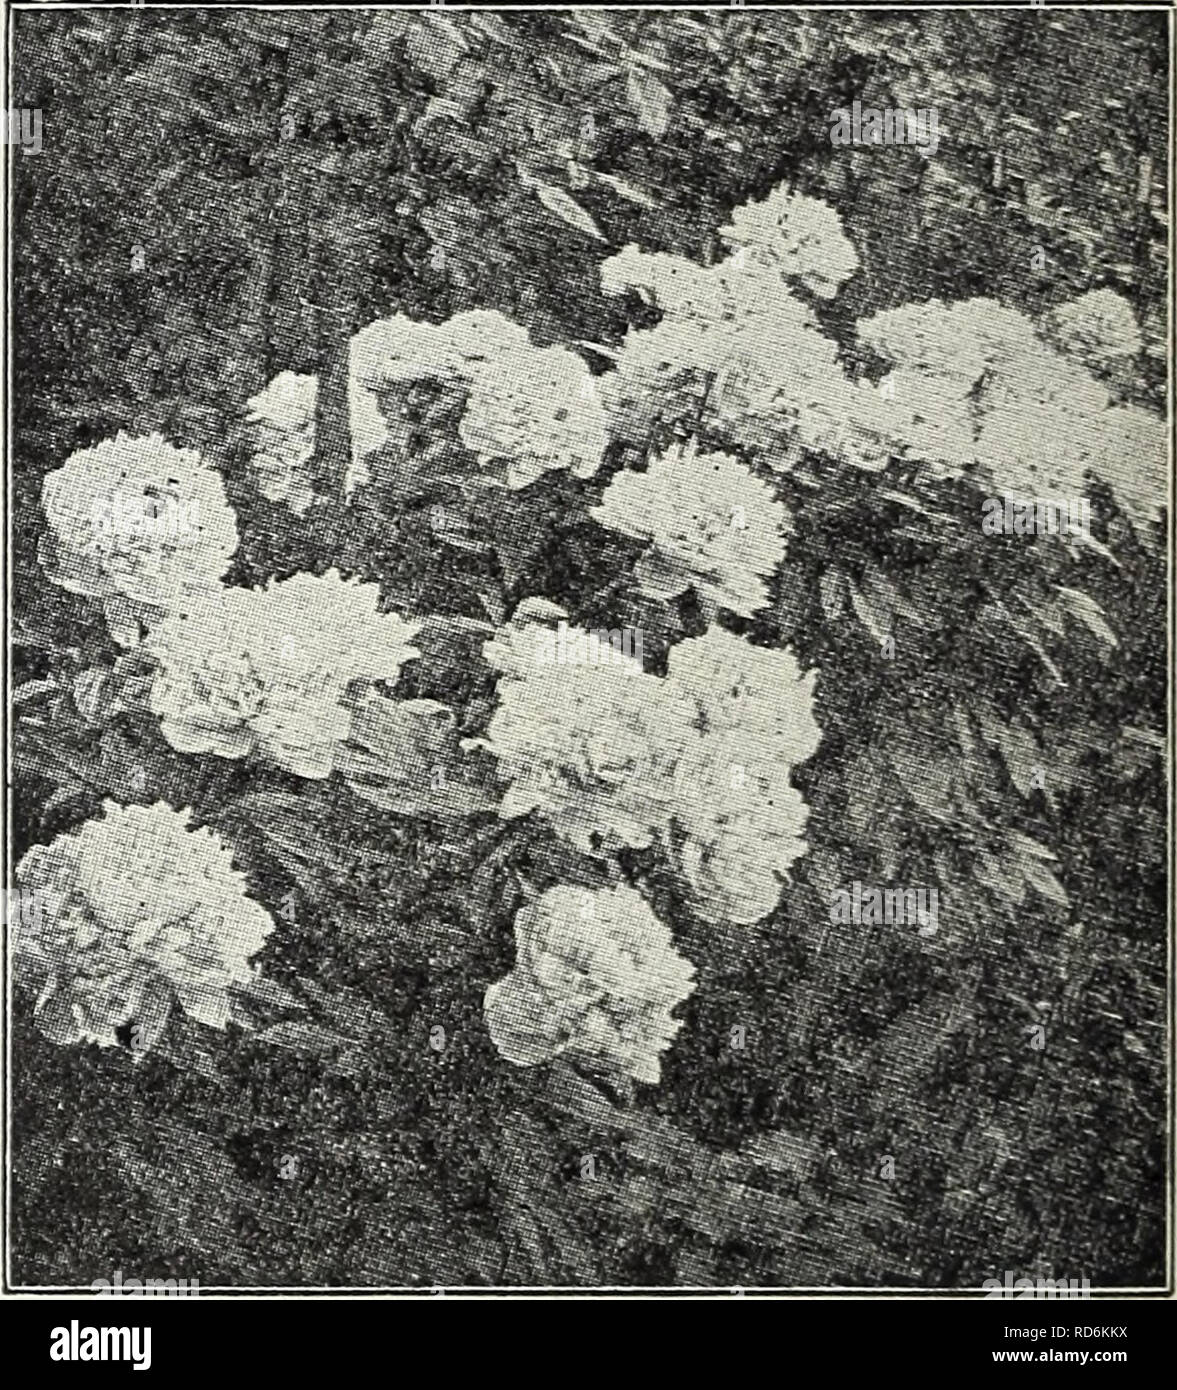 . Currie's bulbs and plants : autumn 1928. Flowers Seeds Catalogs; Bulbs (Plants) Seeds Catalogs; Nurseries (Horticulture) Catalogs; Plants, Ornamental Catalogs. Shasta Daisy SHASTA DAISY A very attractive hardy plant, producing large white flowers profuselv through- out the summer months. Price, each, 25c; per dozen, ;. . ... $ 2.50 TRADESCANTIA (Spider Wort) Virgrinica — Produces a succession of blue flowers all summer. Price, each 25c- per dozen, 2.50 TUNICA Saxifraga — A pretty tufted plant with light pink flowers. 1 foot. Price, each. 25c: per dozen o^5q A^ALERIANA (Hardy Garden Heliotrop Stock Photo